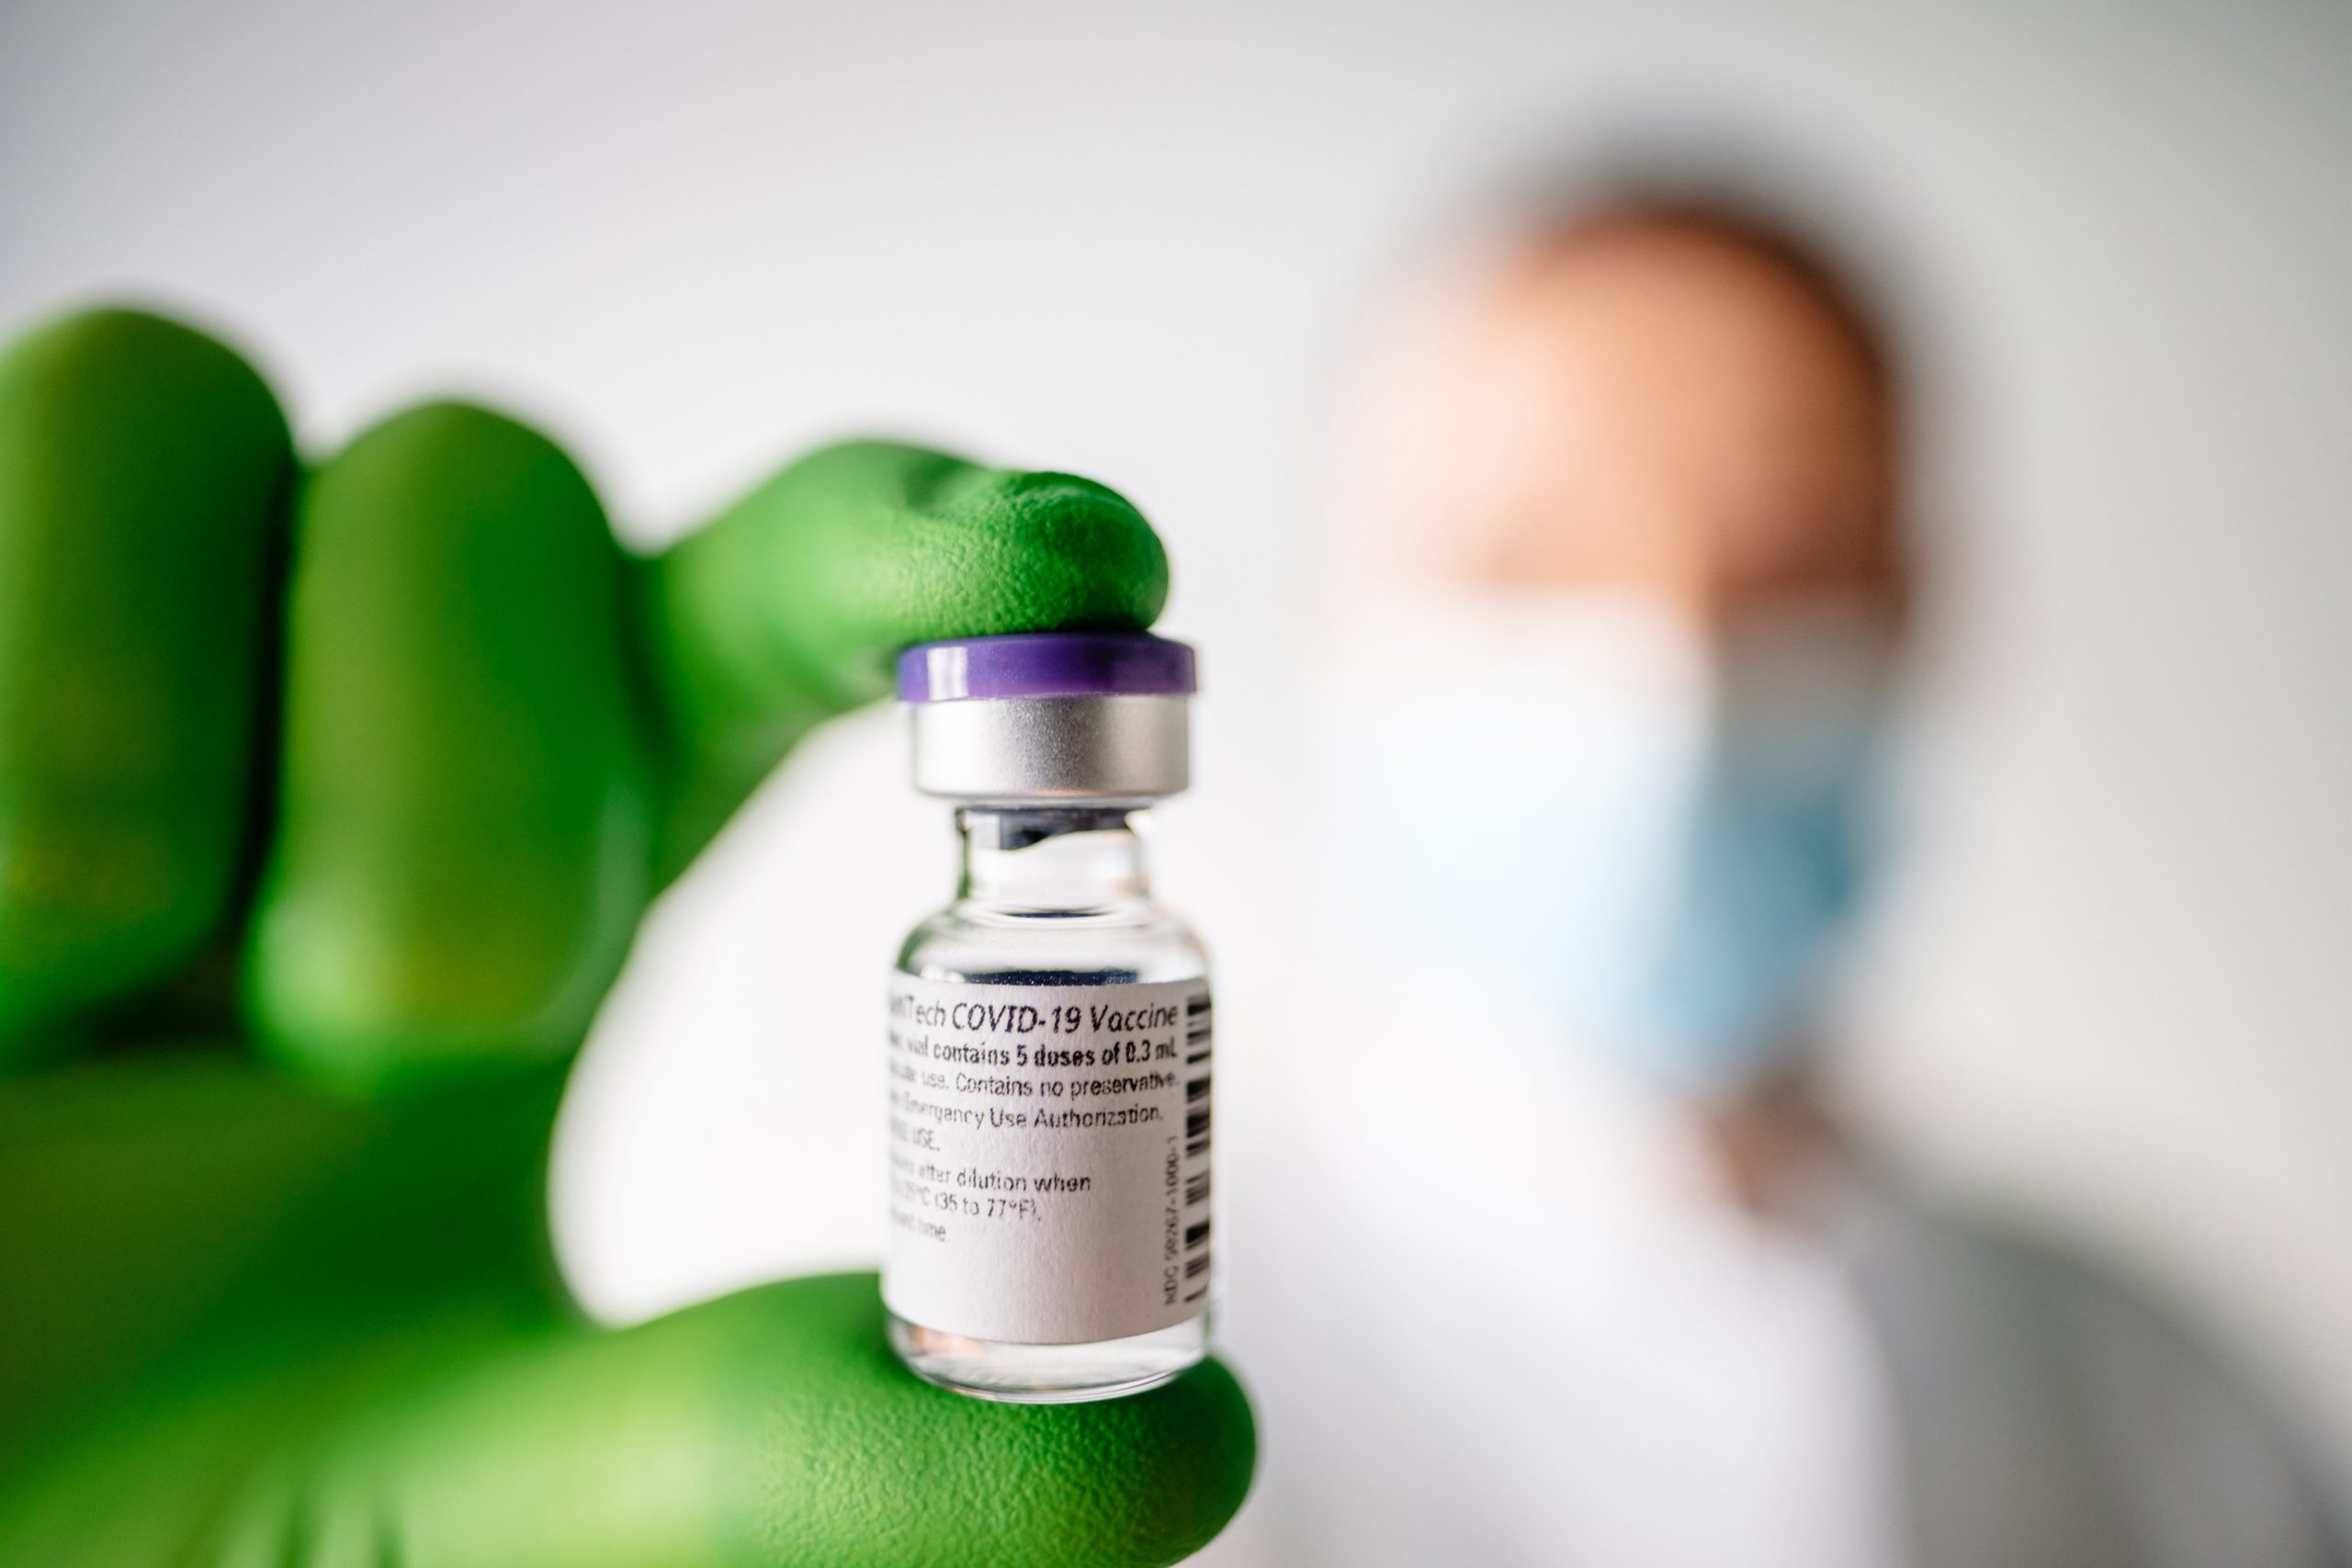 Pediatric COVID-19 vaccine now available in Alabama